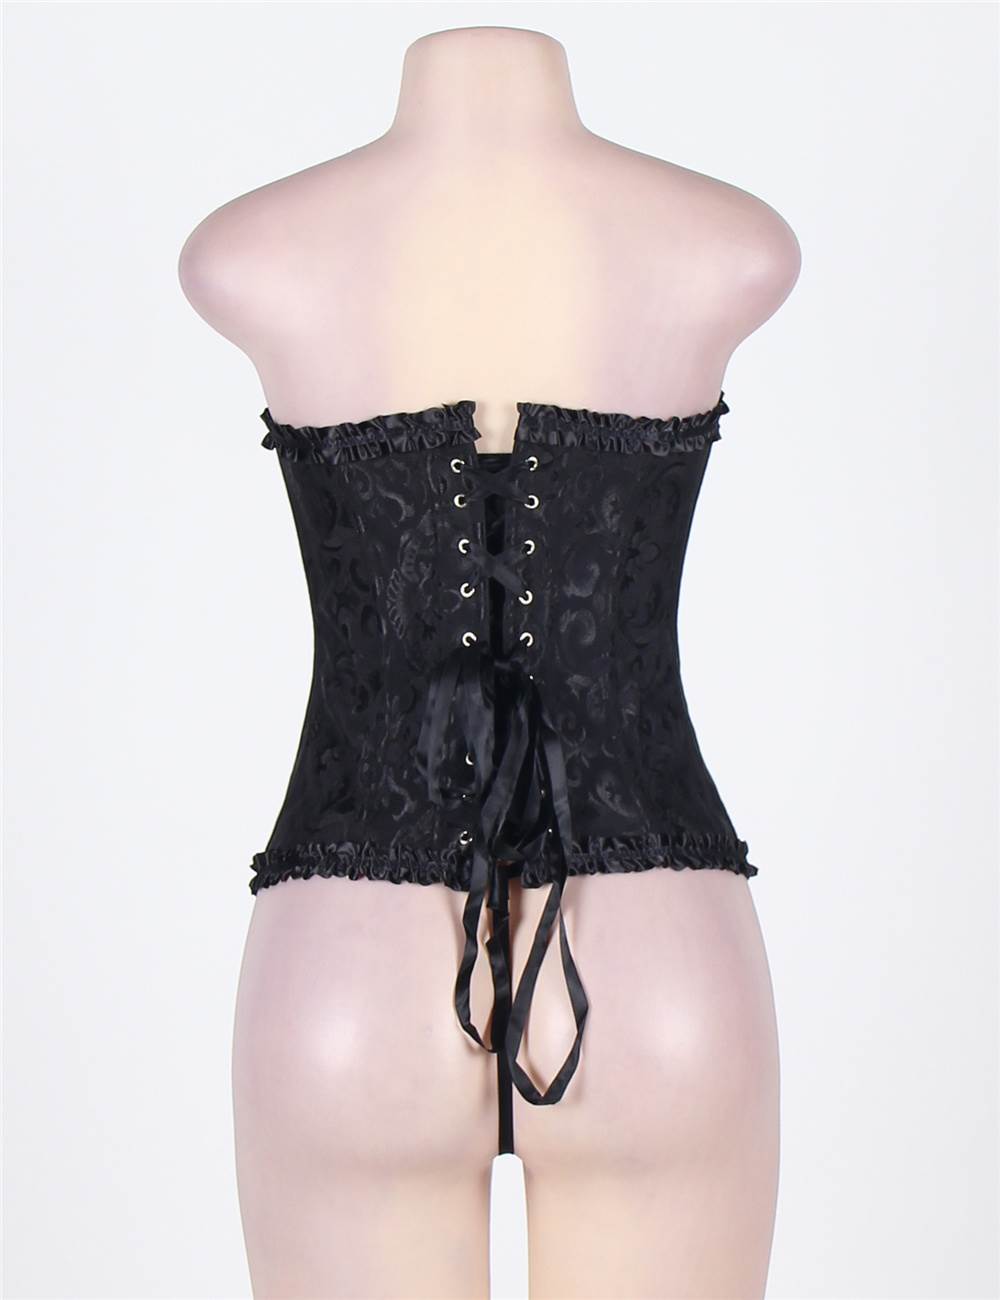 Black corset hook up with dick